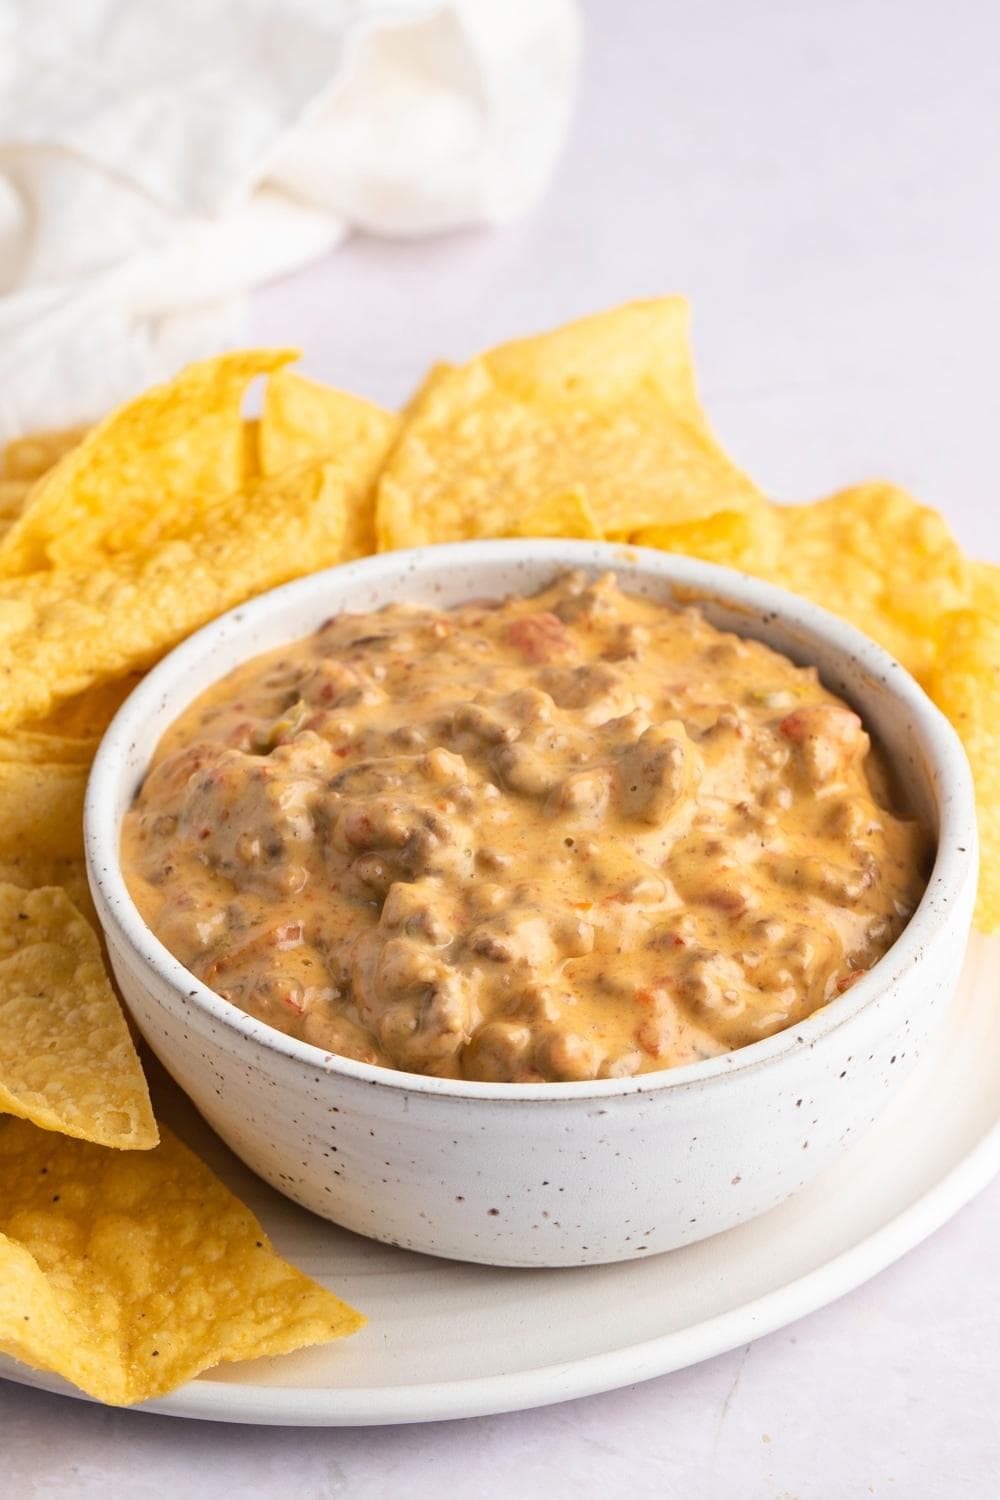 Meaty and Cheesy Rotel Dip